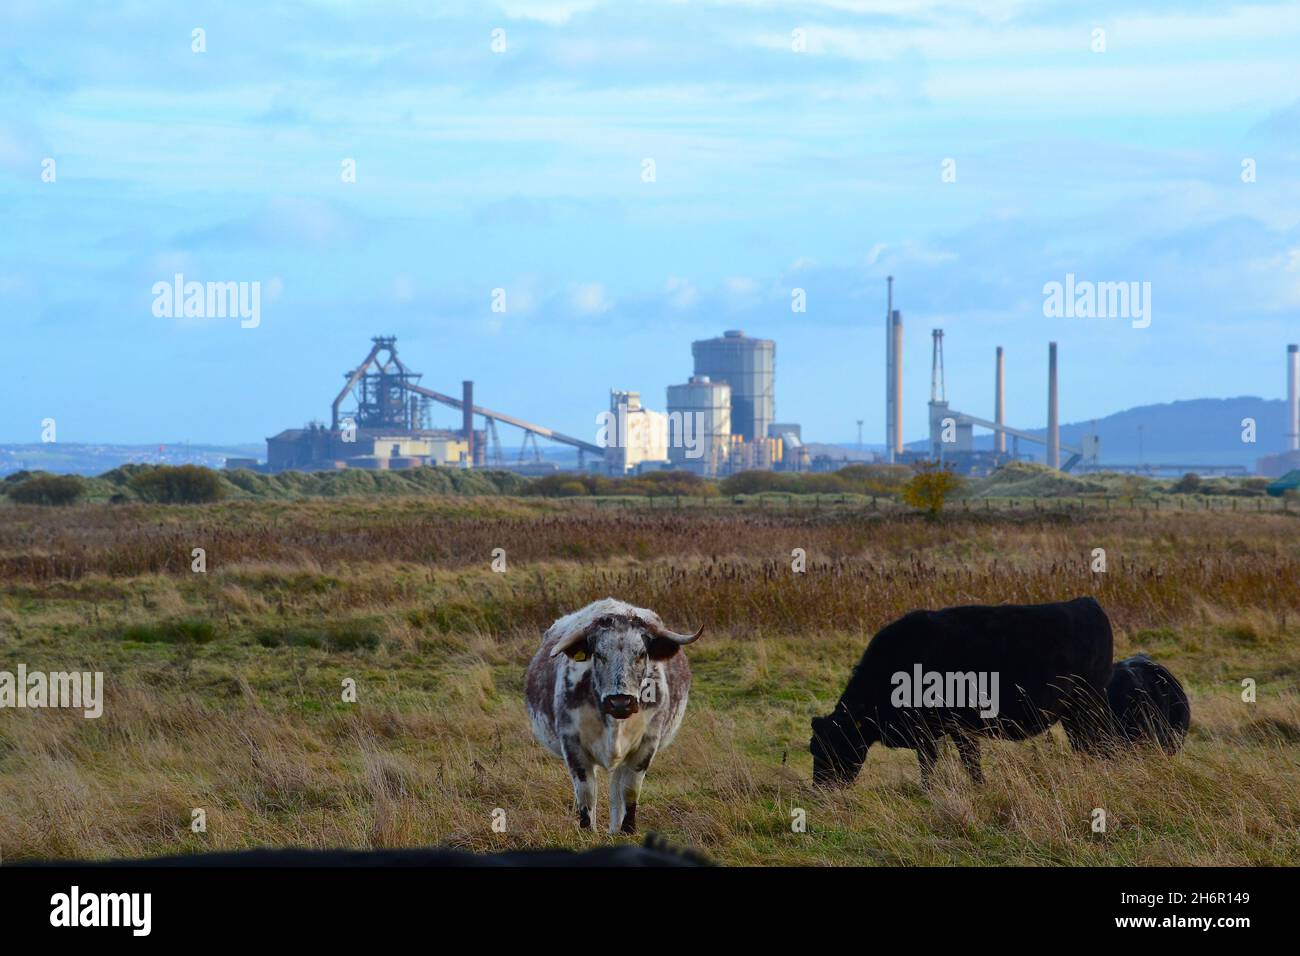 Looking across Tees Bay towards Teeswork's, former Redcar Steelworks, Teesside Freeport and future Net Zero Teesside Power and Carbon Capture site. Stock Photo